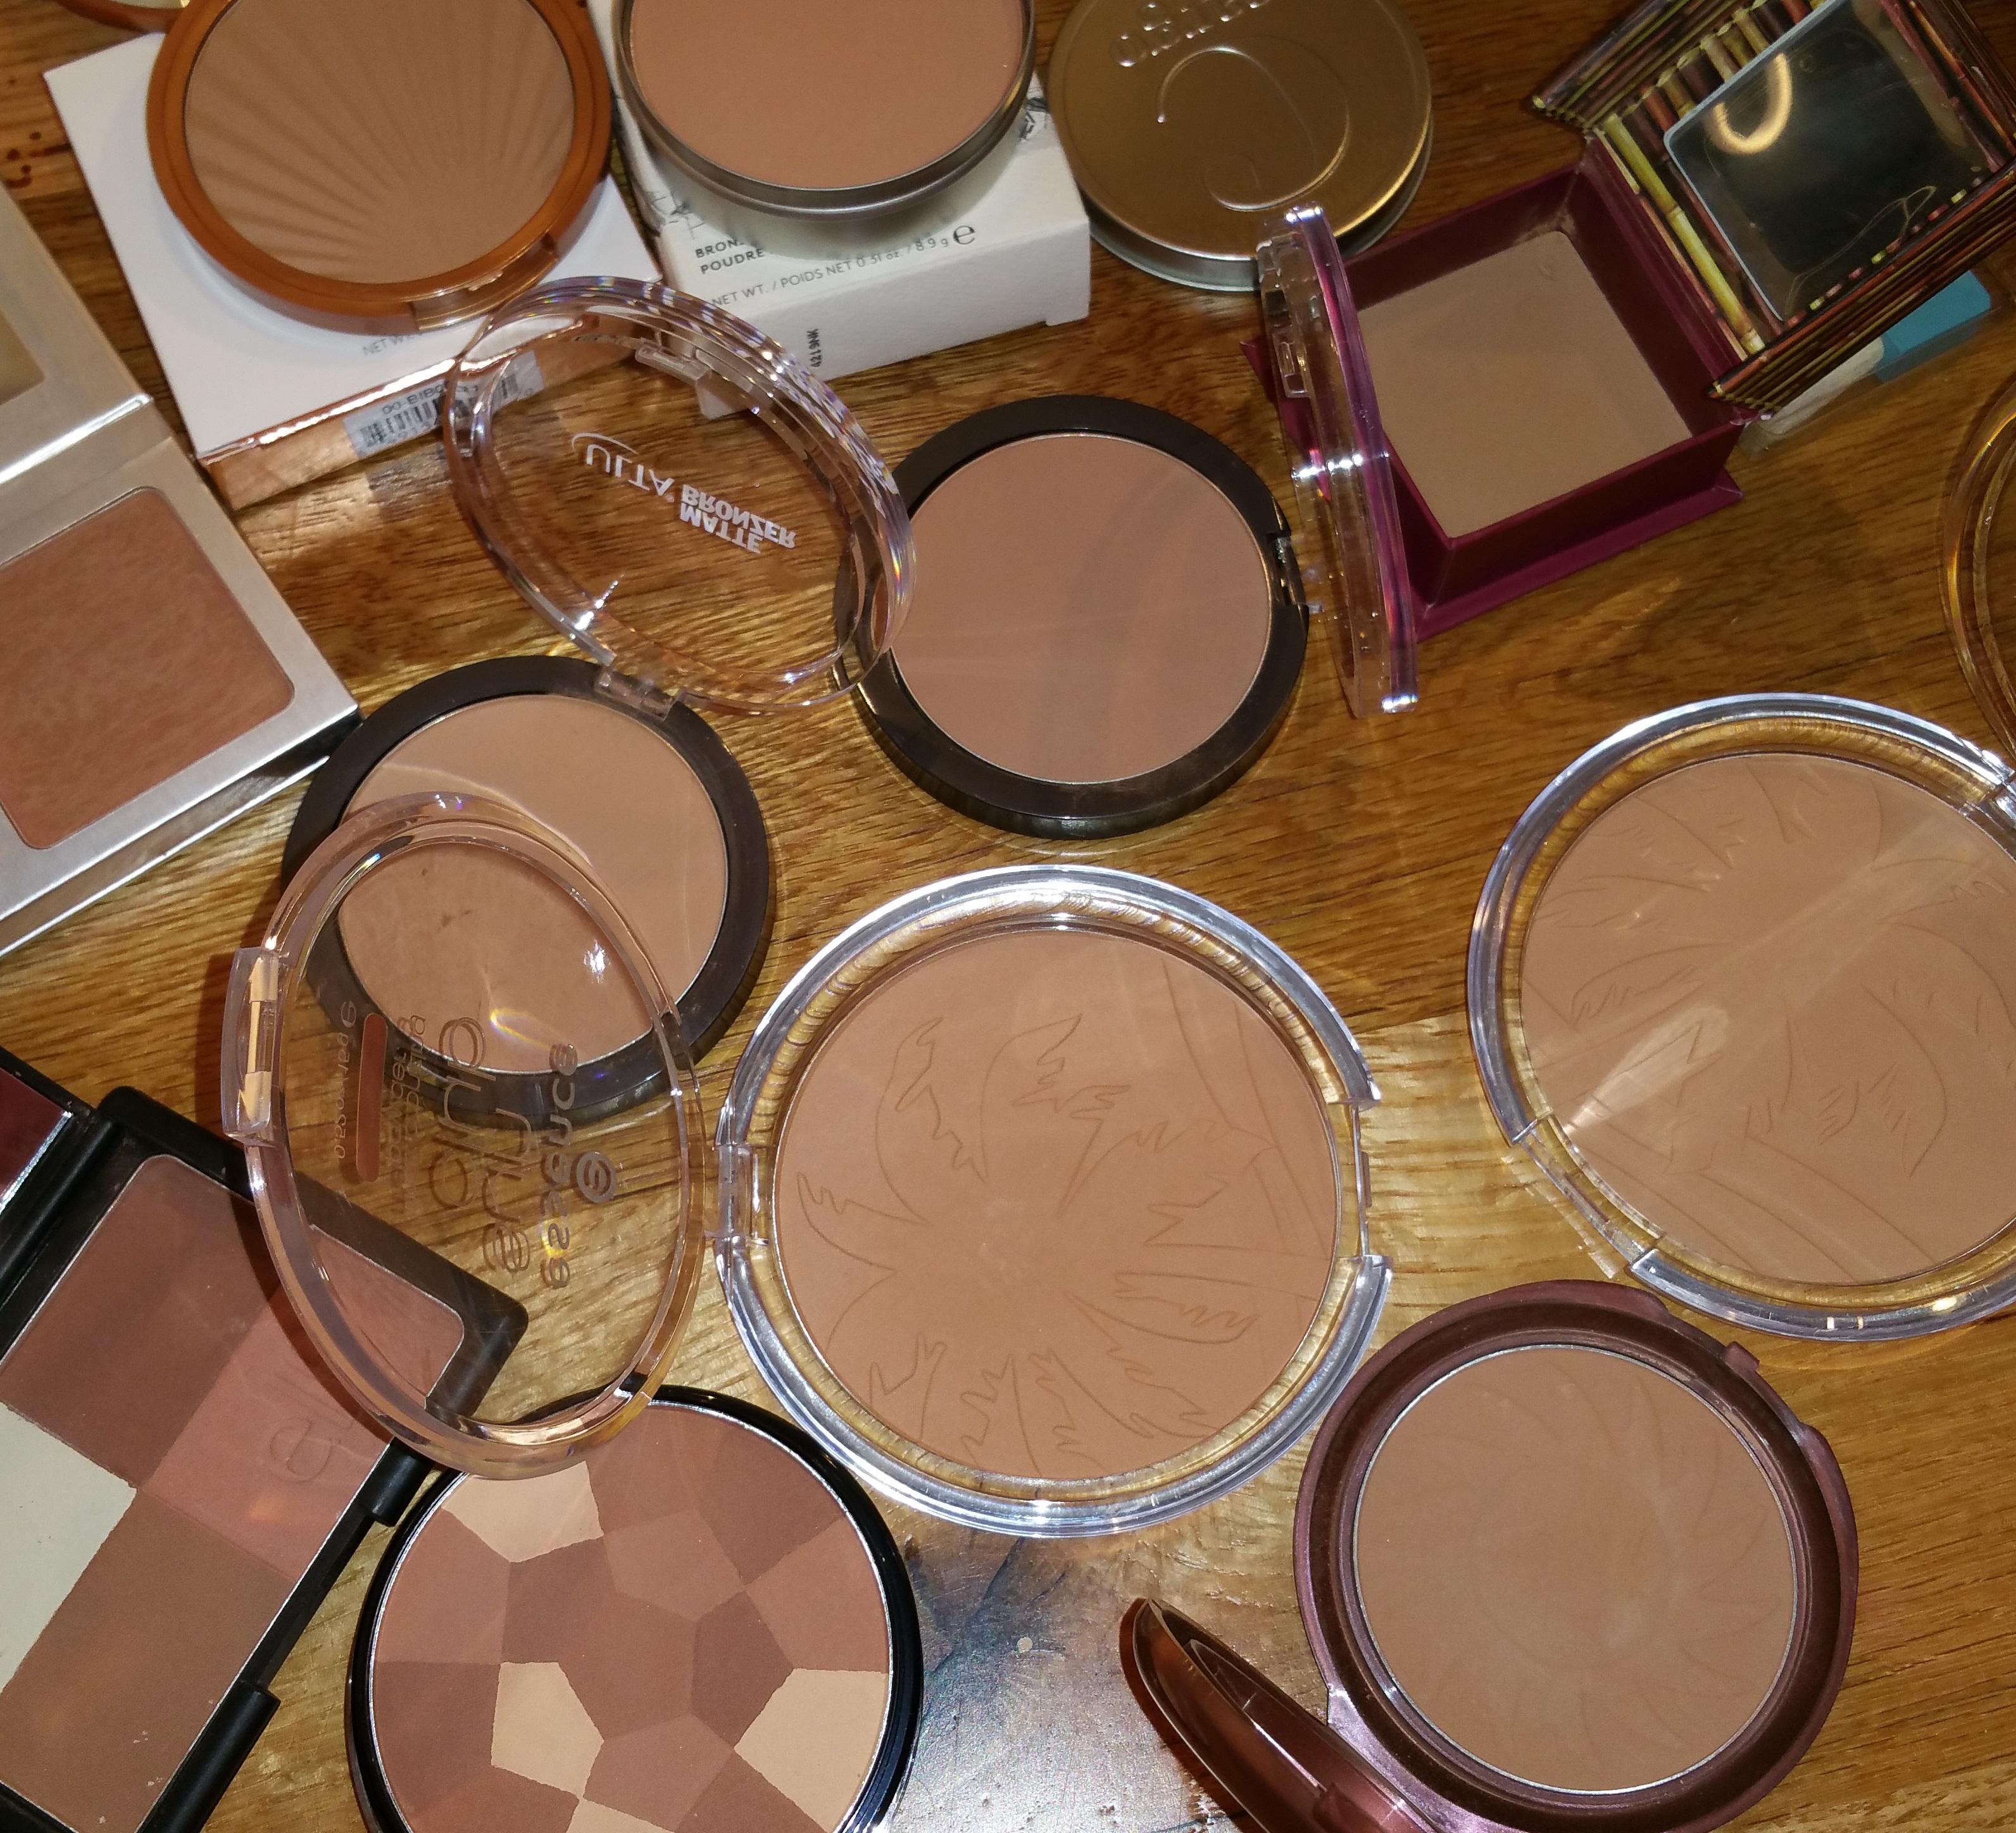 Starting from bottom left: e.l.f. Cool Bronzer, NYC Color Wheel - All Over Bronze, and Smooth Skin Bronzing Face Powder; Second row right to left: Essence Sun Club - 01 Natural and 02 Sunny; Third row: left to right: Ulta Matte Bronzer Warm and Cool; Top row right to left: Benefit Hoola, Cargo Matte Bronzer - Medium, Laura Geller Matte - Medium, and It Cosmetics CC + Bronzer.